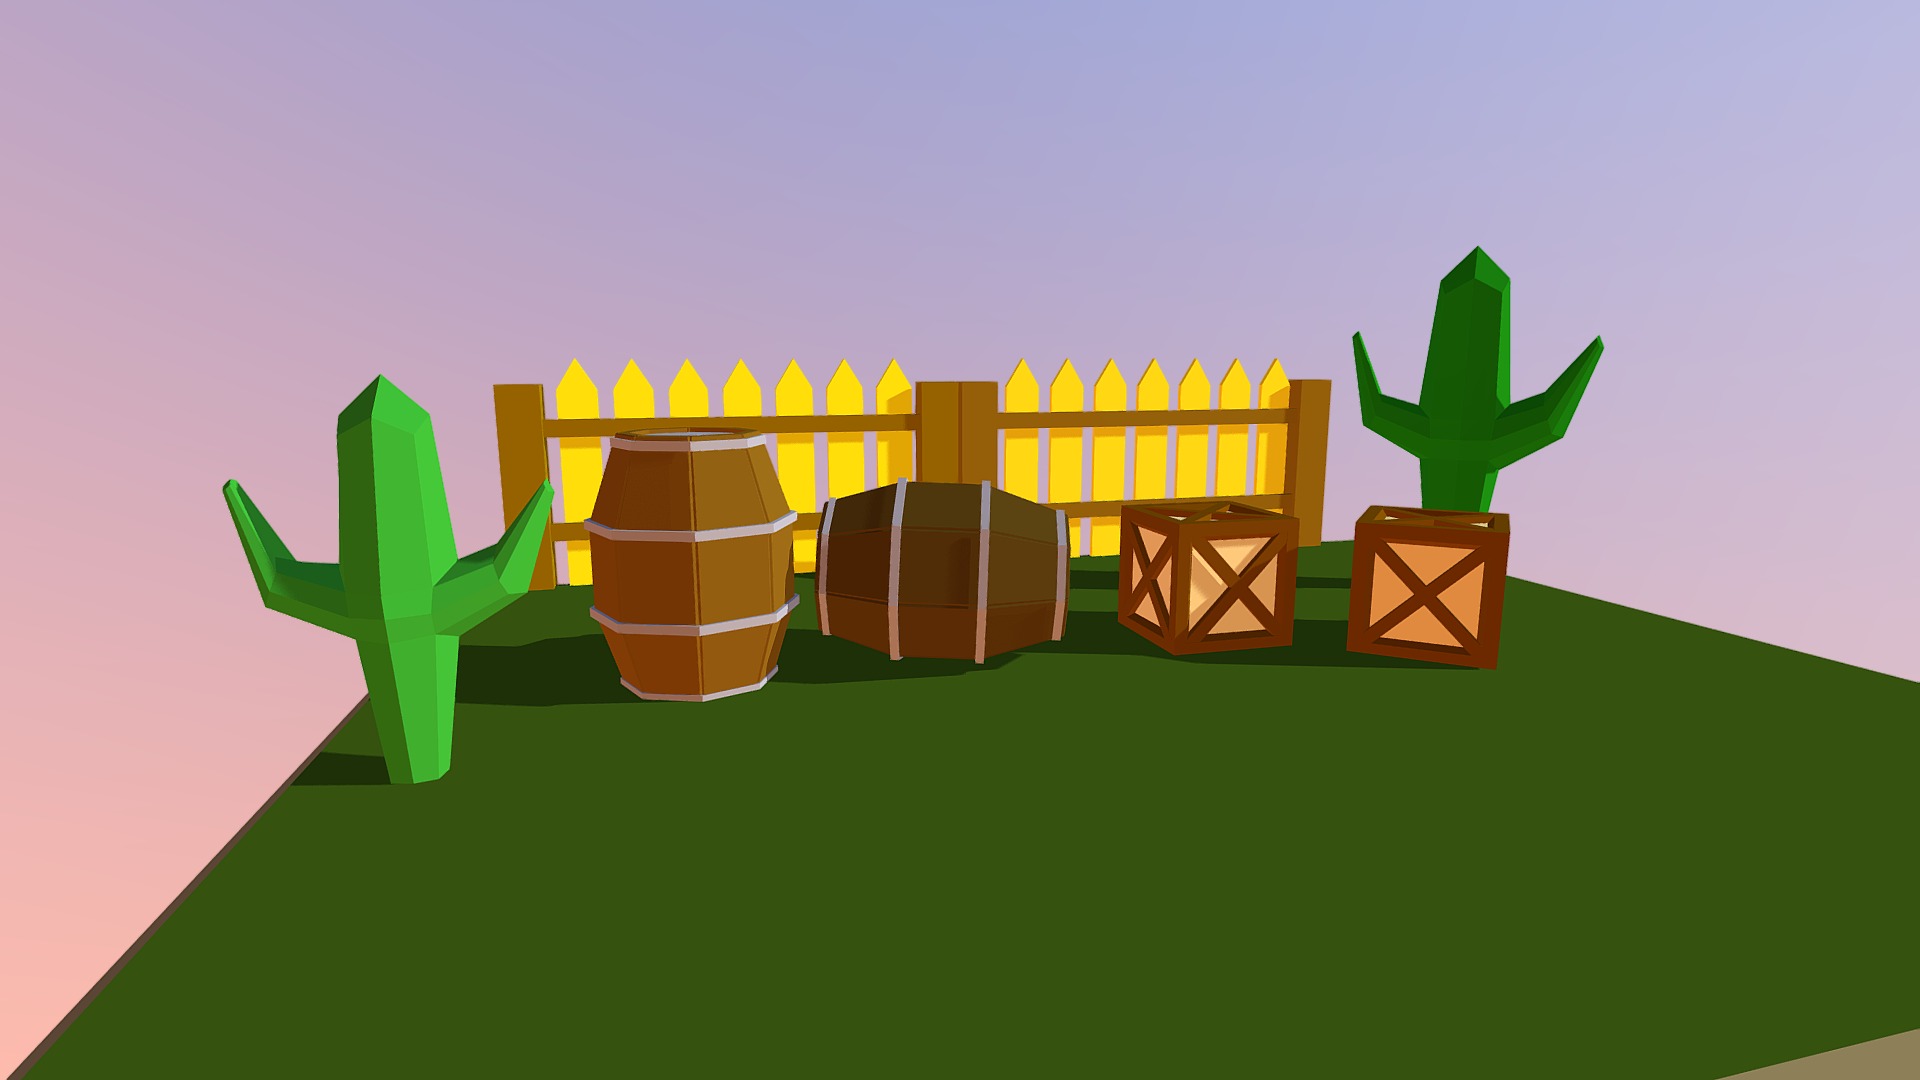 3D model Low-poly: Box and Barrel, Cactus, Fence - This is a 3D model of the Low-poly: Box and Barrel, Cactus, Fence. The 3D model is about a cartoon of a house.